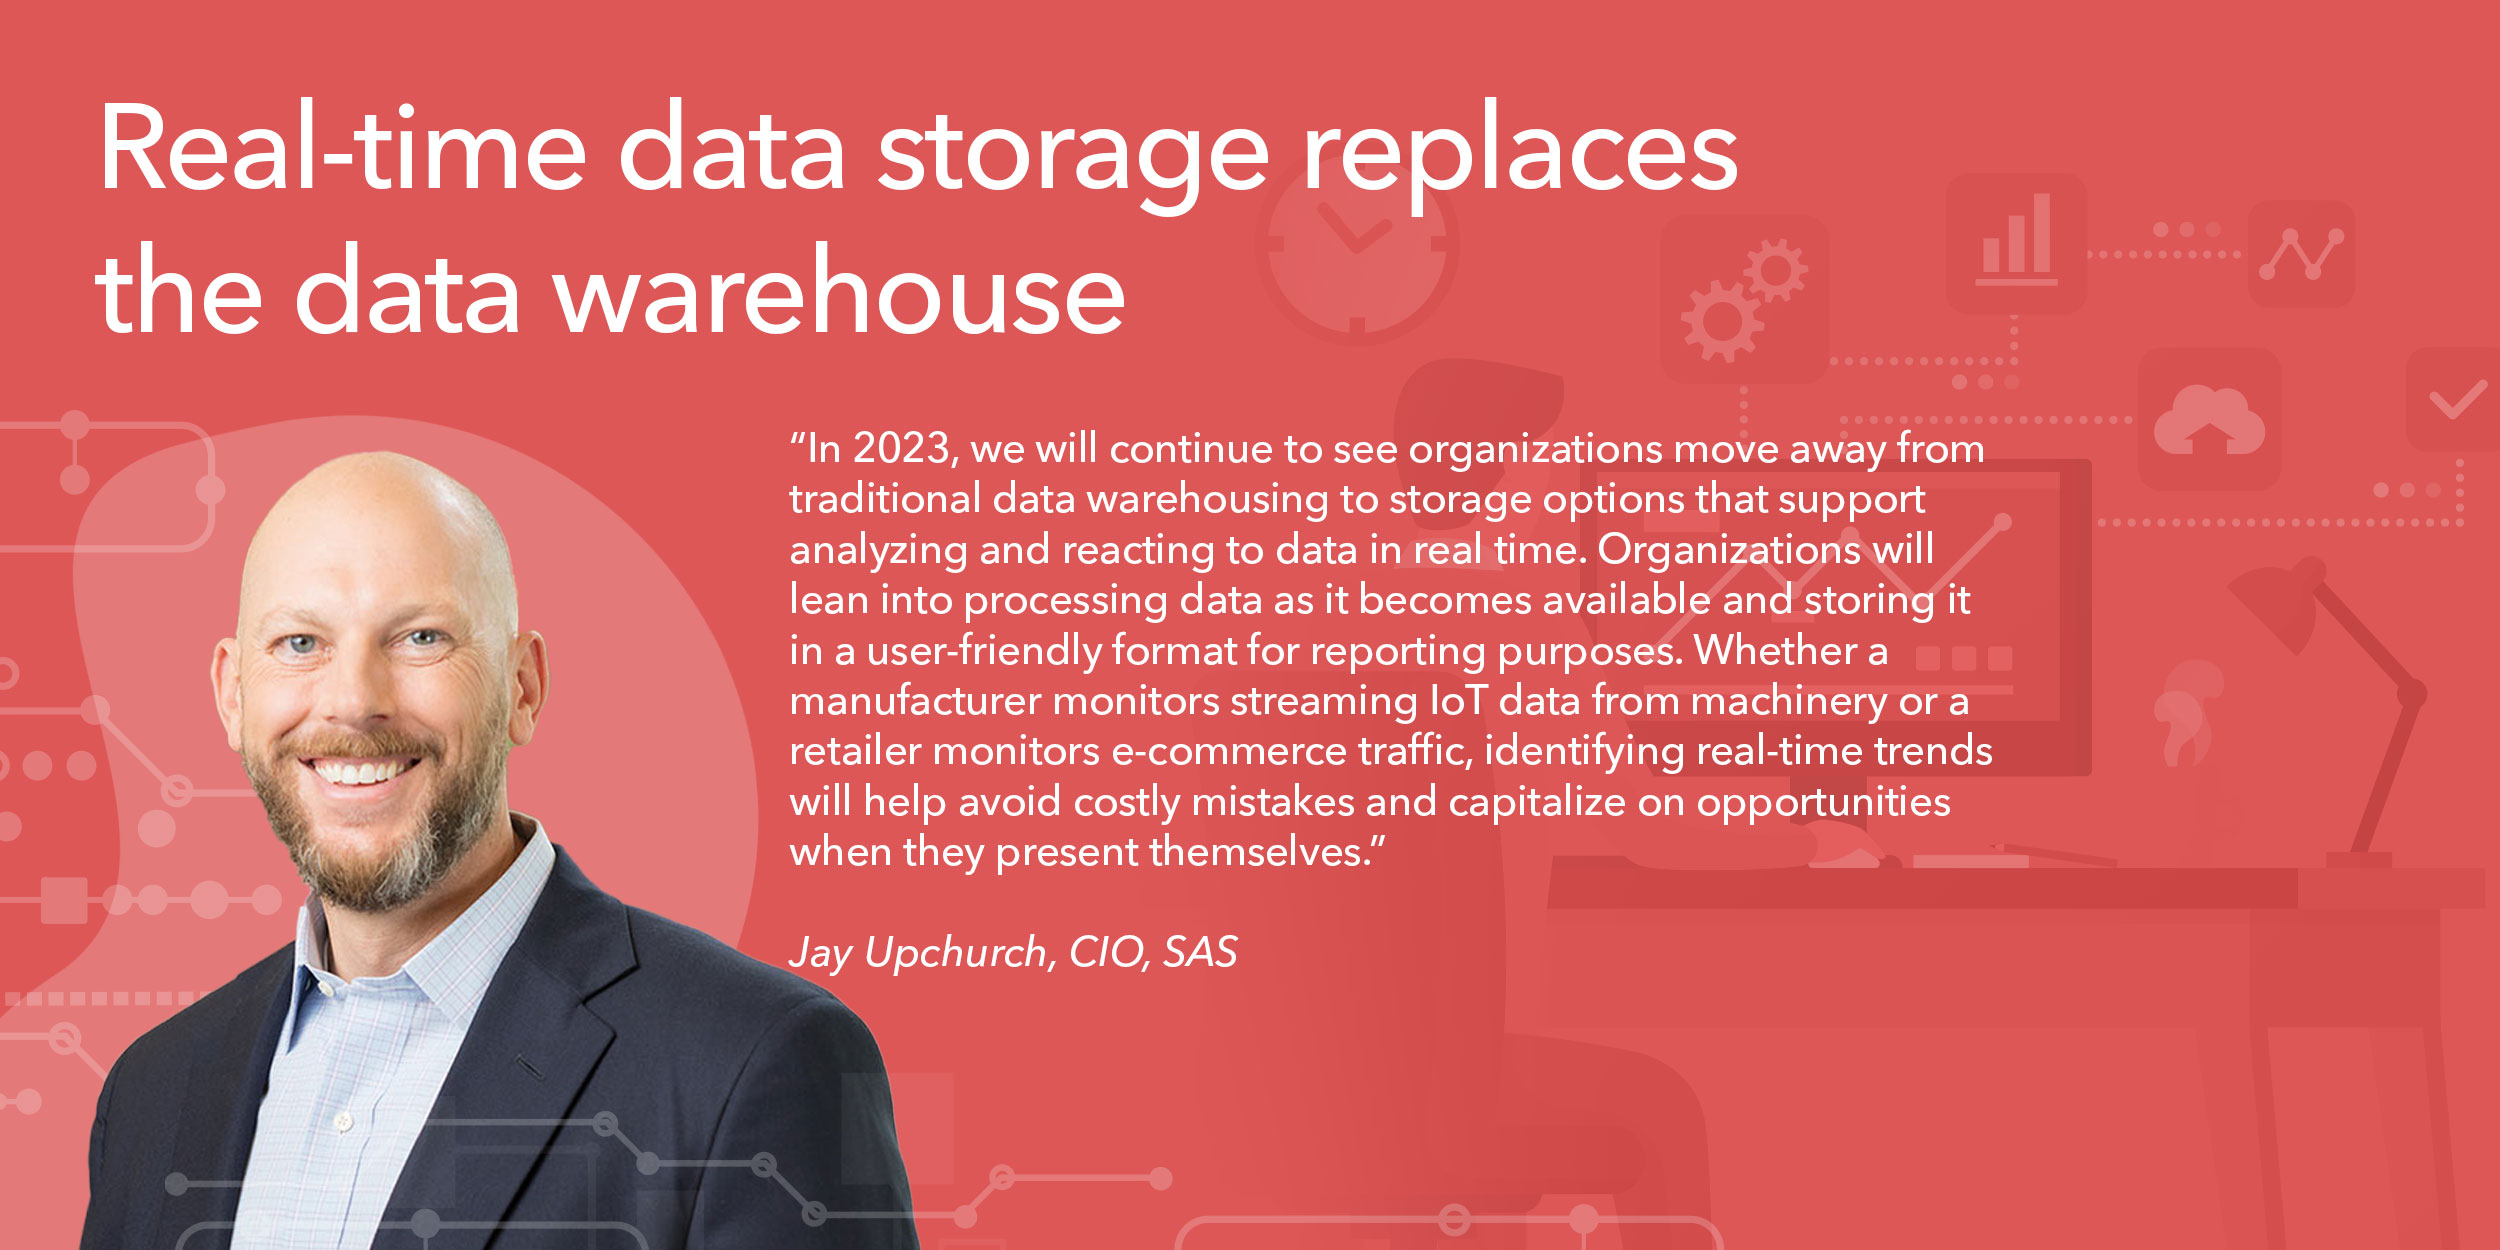 In 2023, we will continue to see organizations move away from traditional data warehousing to storage options that support analyzing and reacting to data in real time. Organizations will lean into processing data as it becomes available and storing it in a user-friendly format for reporting purposes. Whether a manufacturer monitors streaming IoT data from machinery or a retailer monitors e-commerce traffic, identifying real-time trends will help avoid costly mistakes and capitalize on opportunities when they present themselves. 